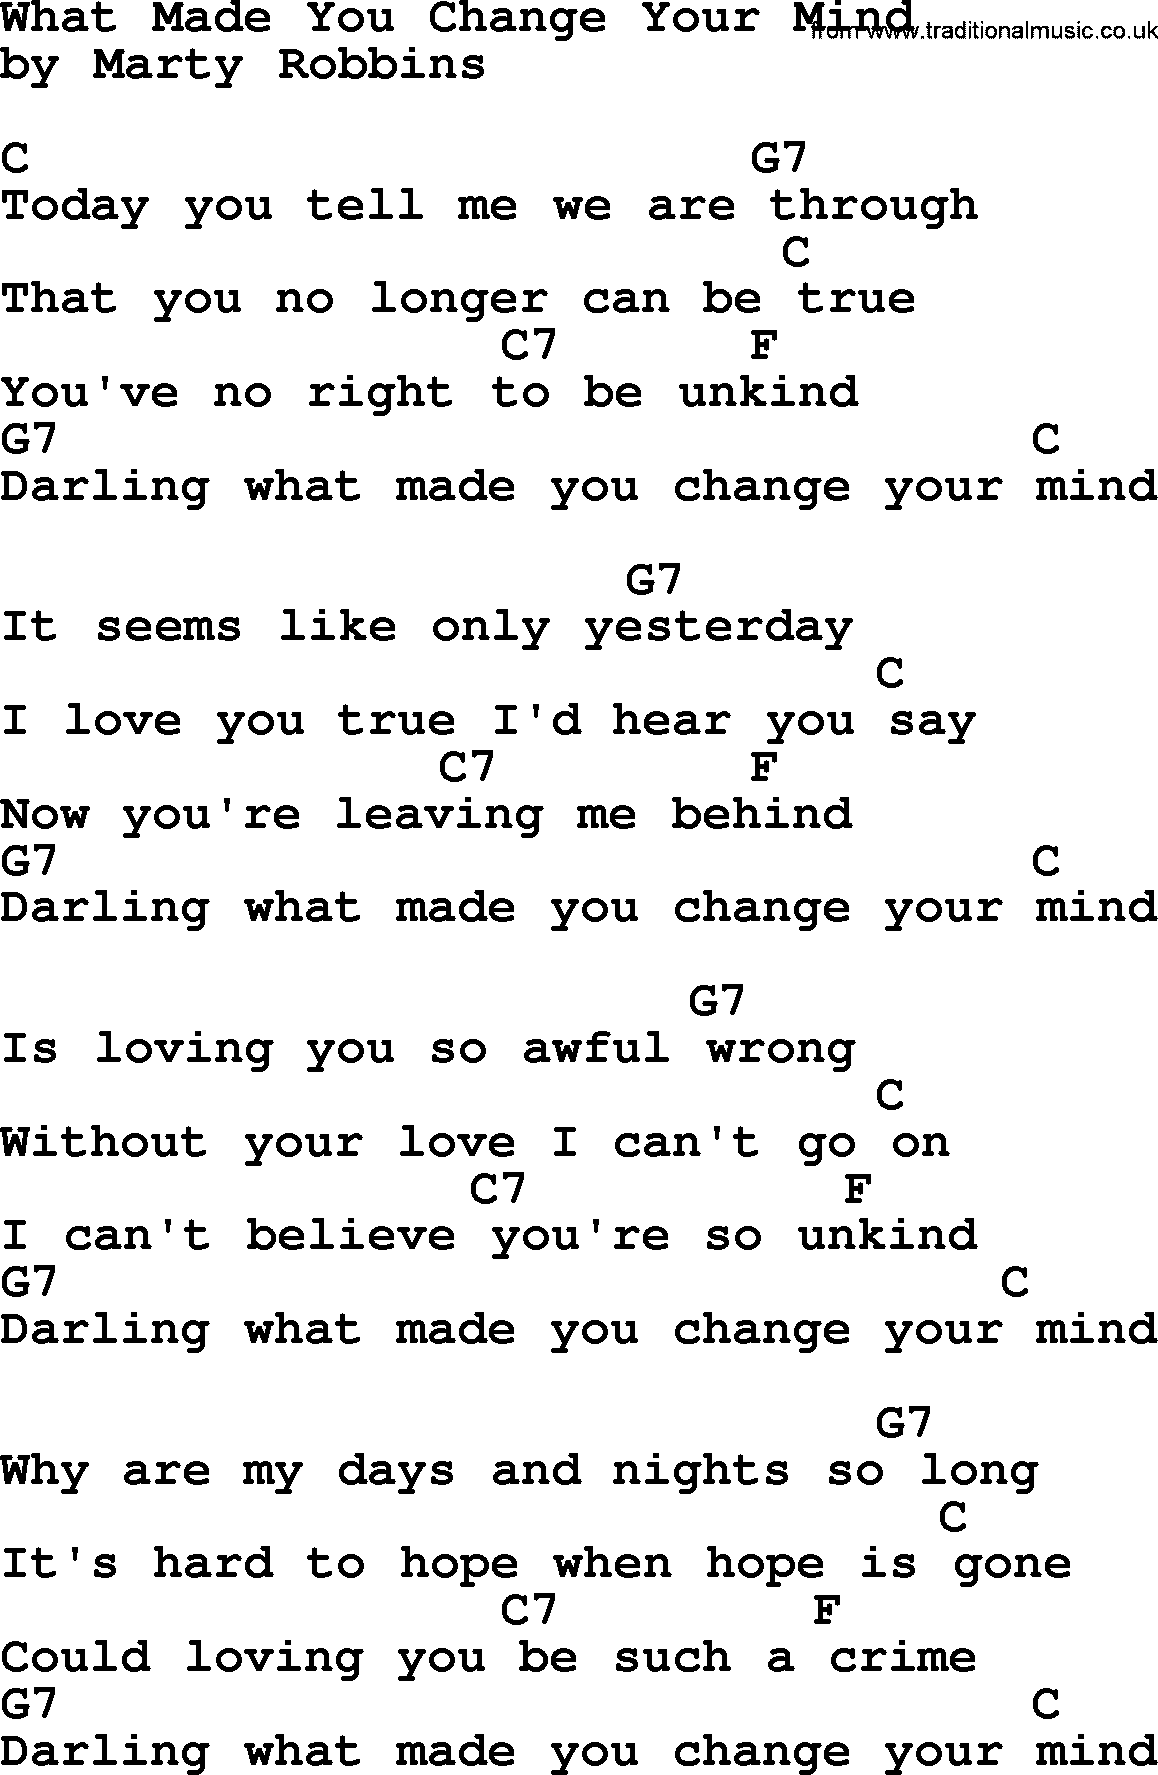 Marty Robbins song: What Made You Change Your Mind, lyrics and chords